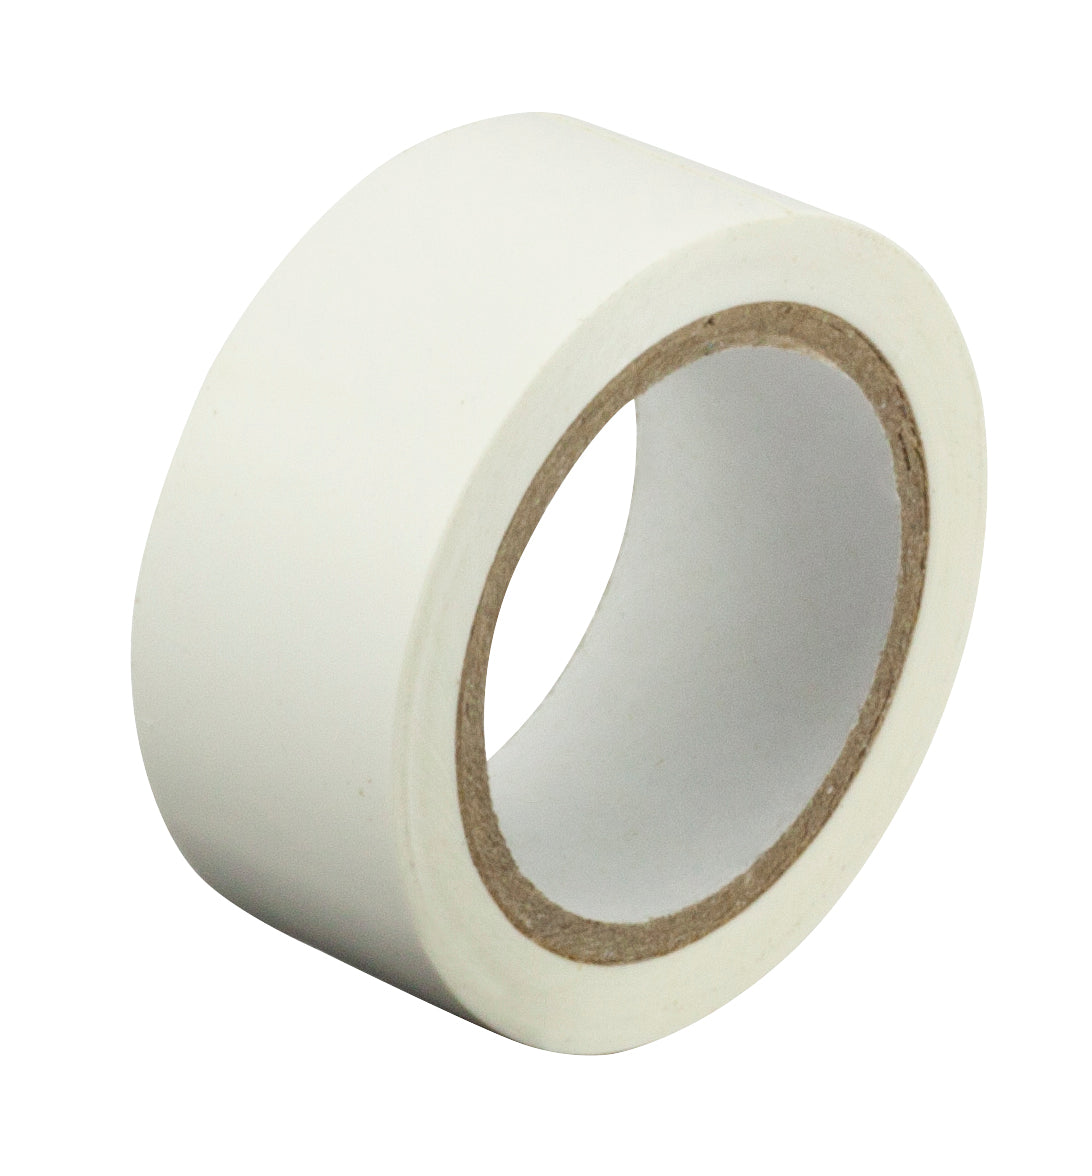 PVC Tape Size: 19mmx5m Roll - White - Pack of 10